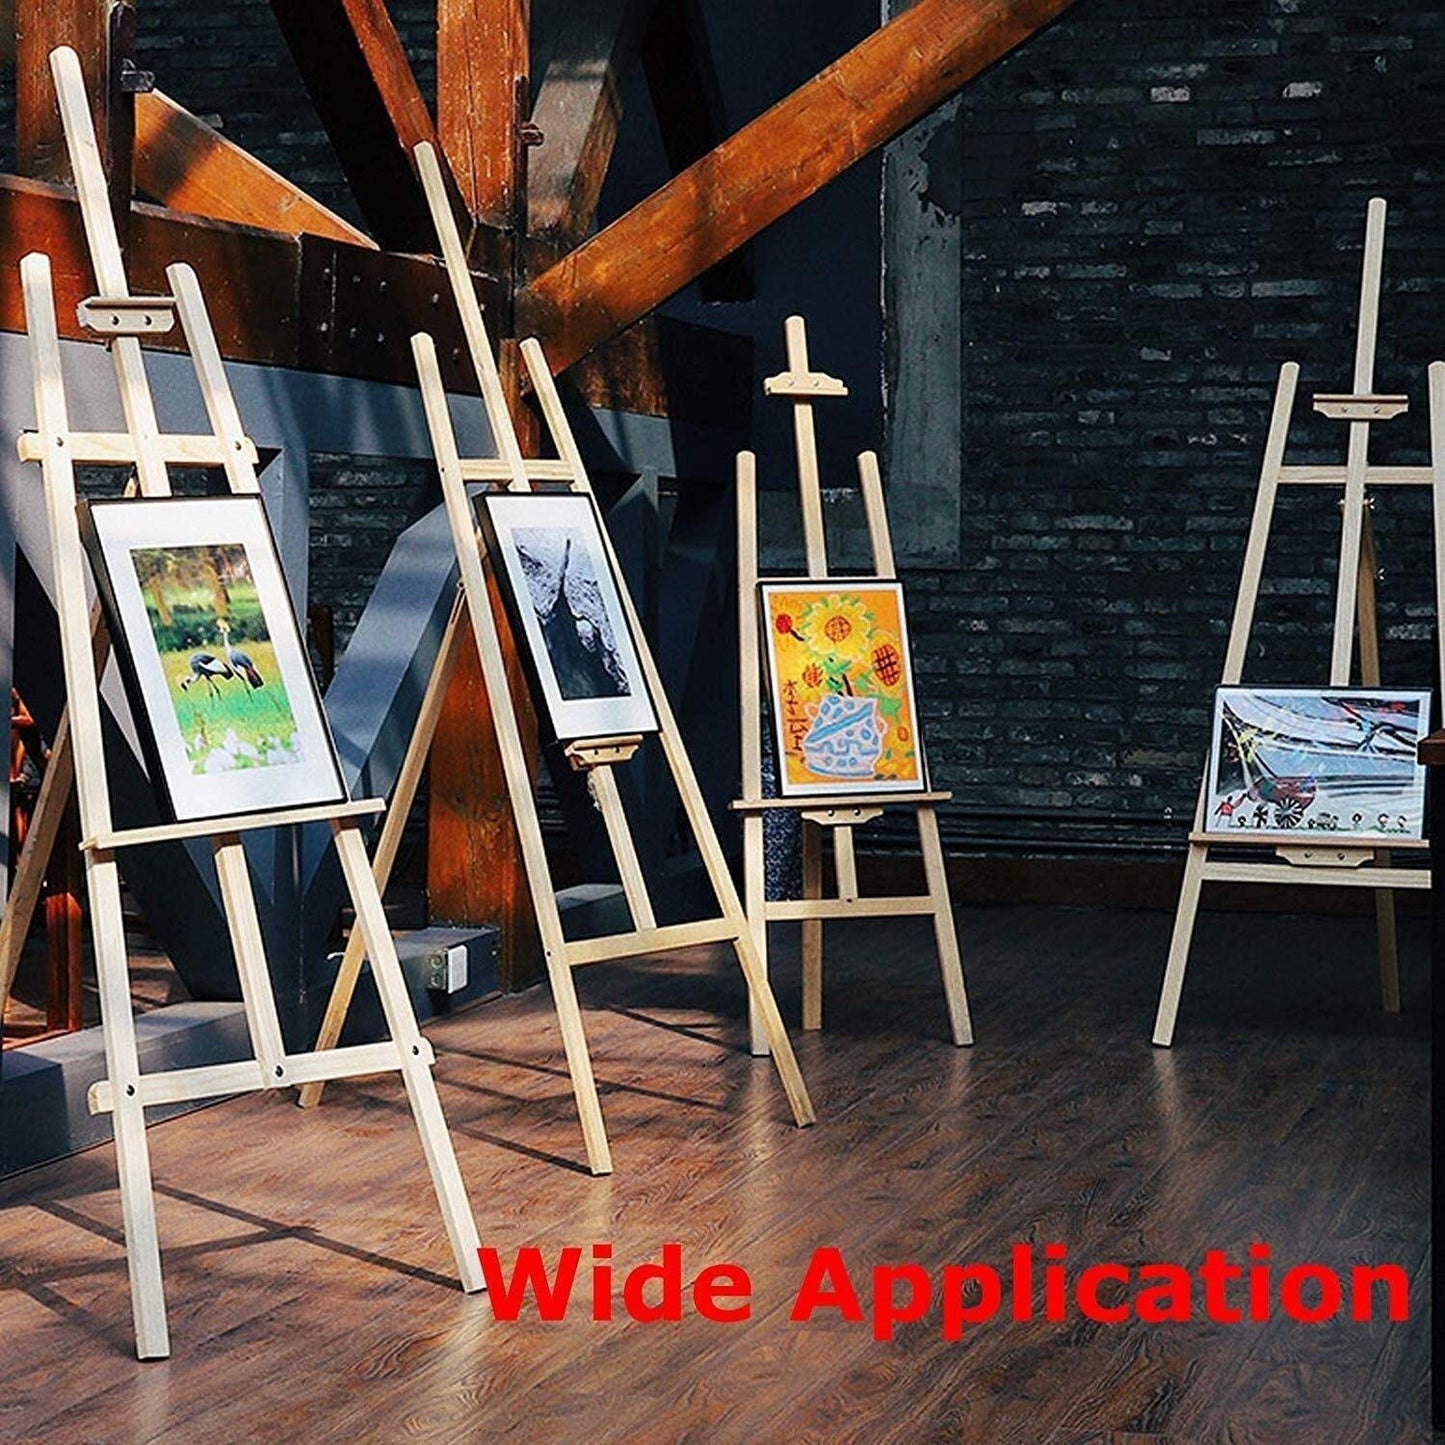 Digismart Wooden Display Adjustable Stand Heavy Artist Easel 3 Legs for Painting, Holding Pictures, Display and Advertisements. 3 Feet (90 cm). Showroom Display, Painting, Drawing. (Wooden)